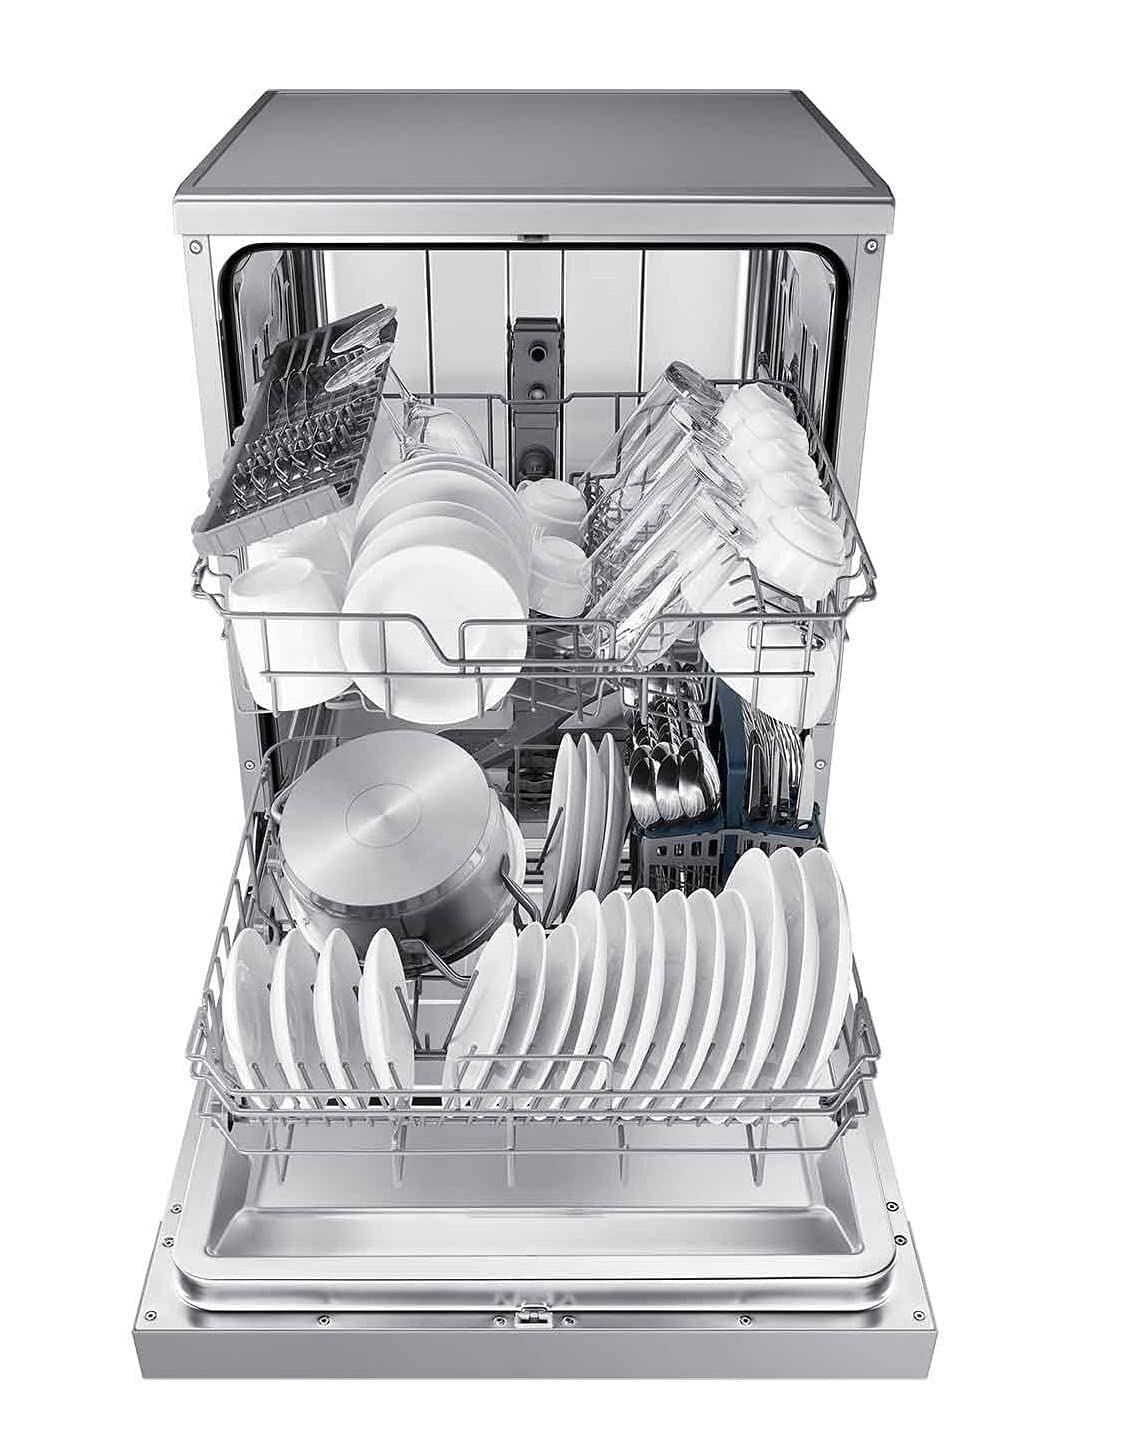 Samsung 13 Place Setting Freestanding Dishwasher with Intensive Wash DW60M6043FS/TL